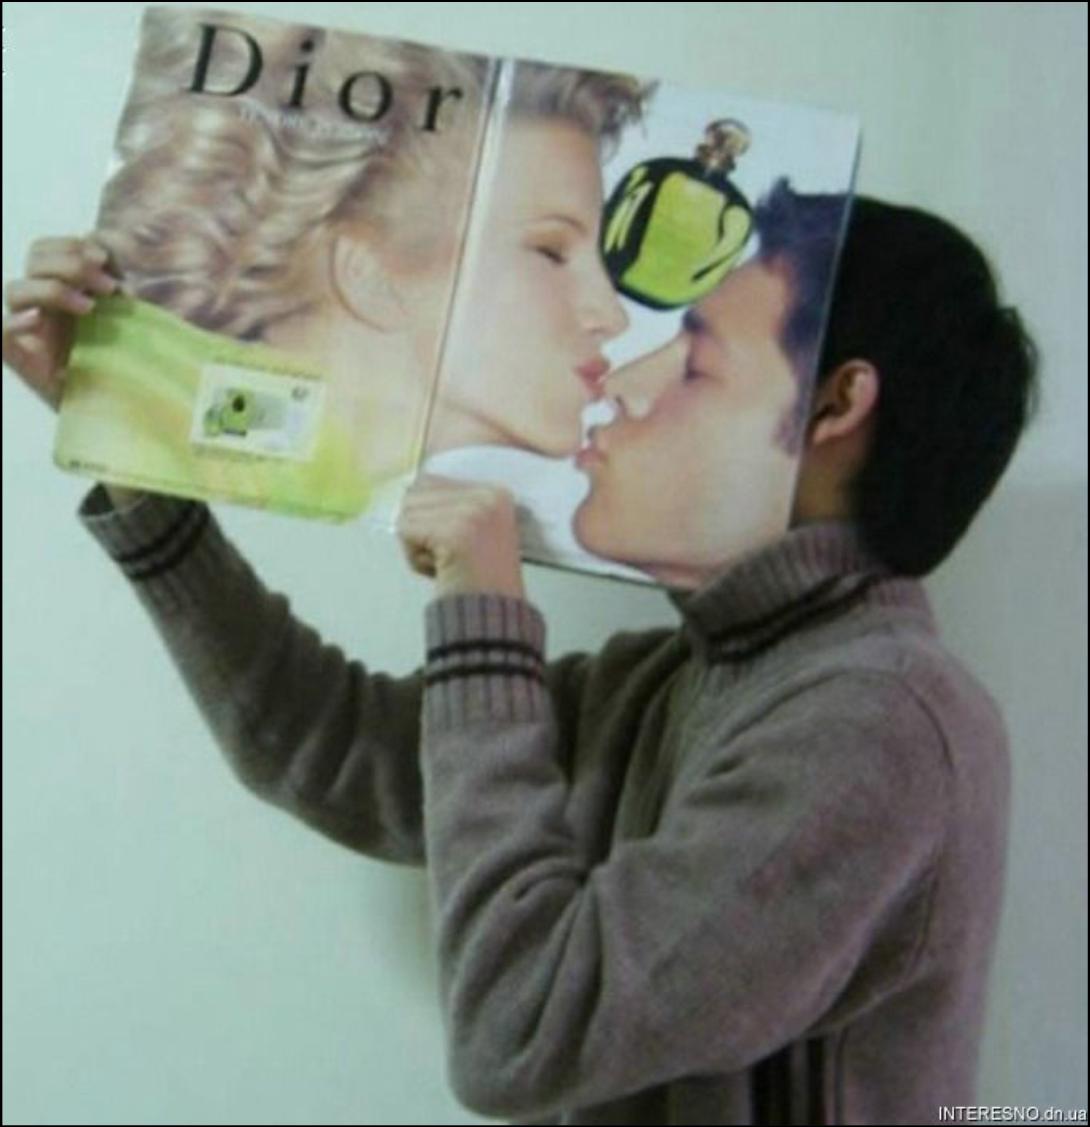 Boy Kissing Magazine Girl Funny Unusual Angle Picture